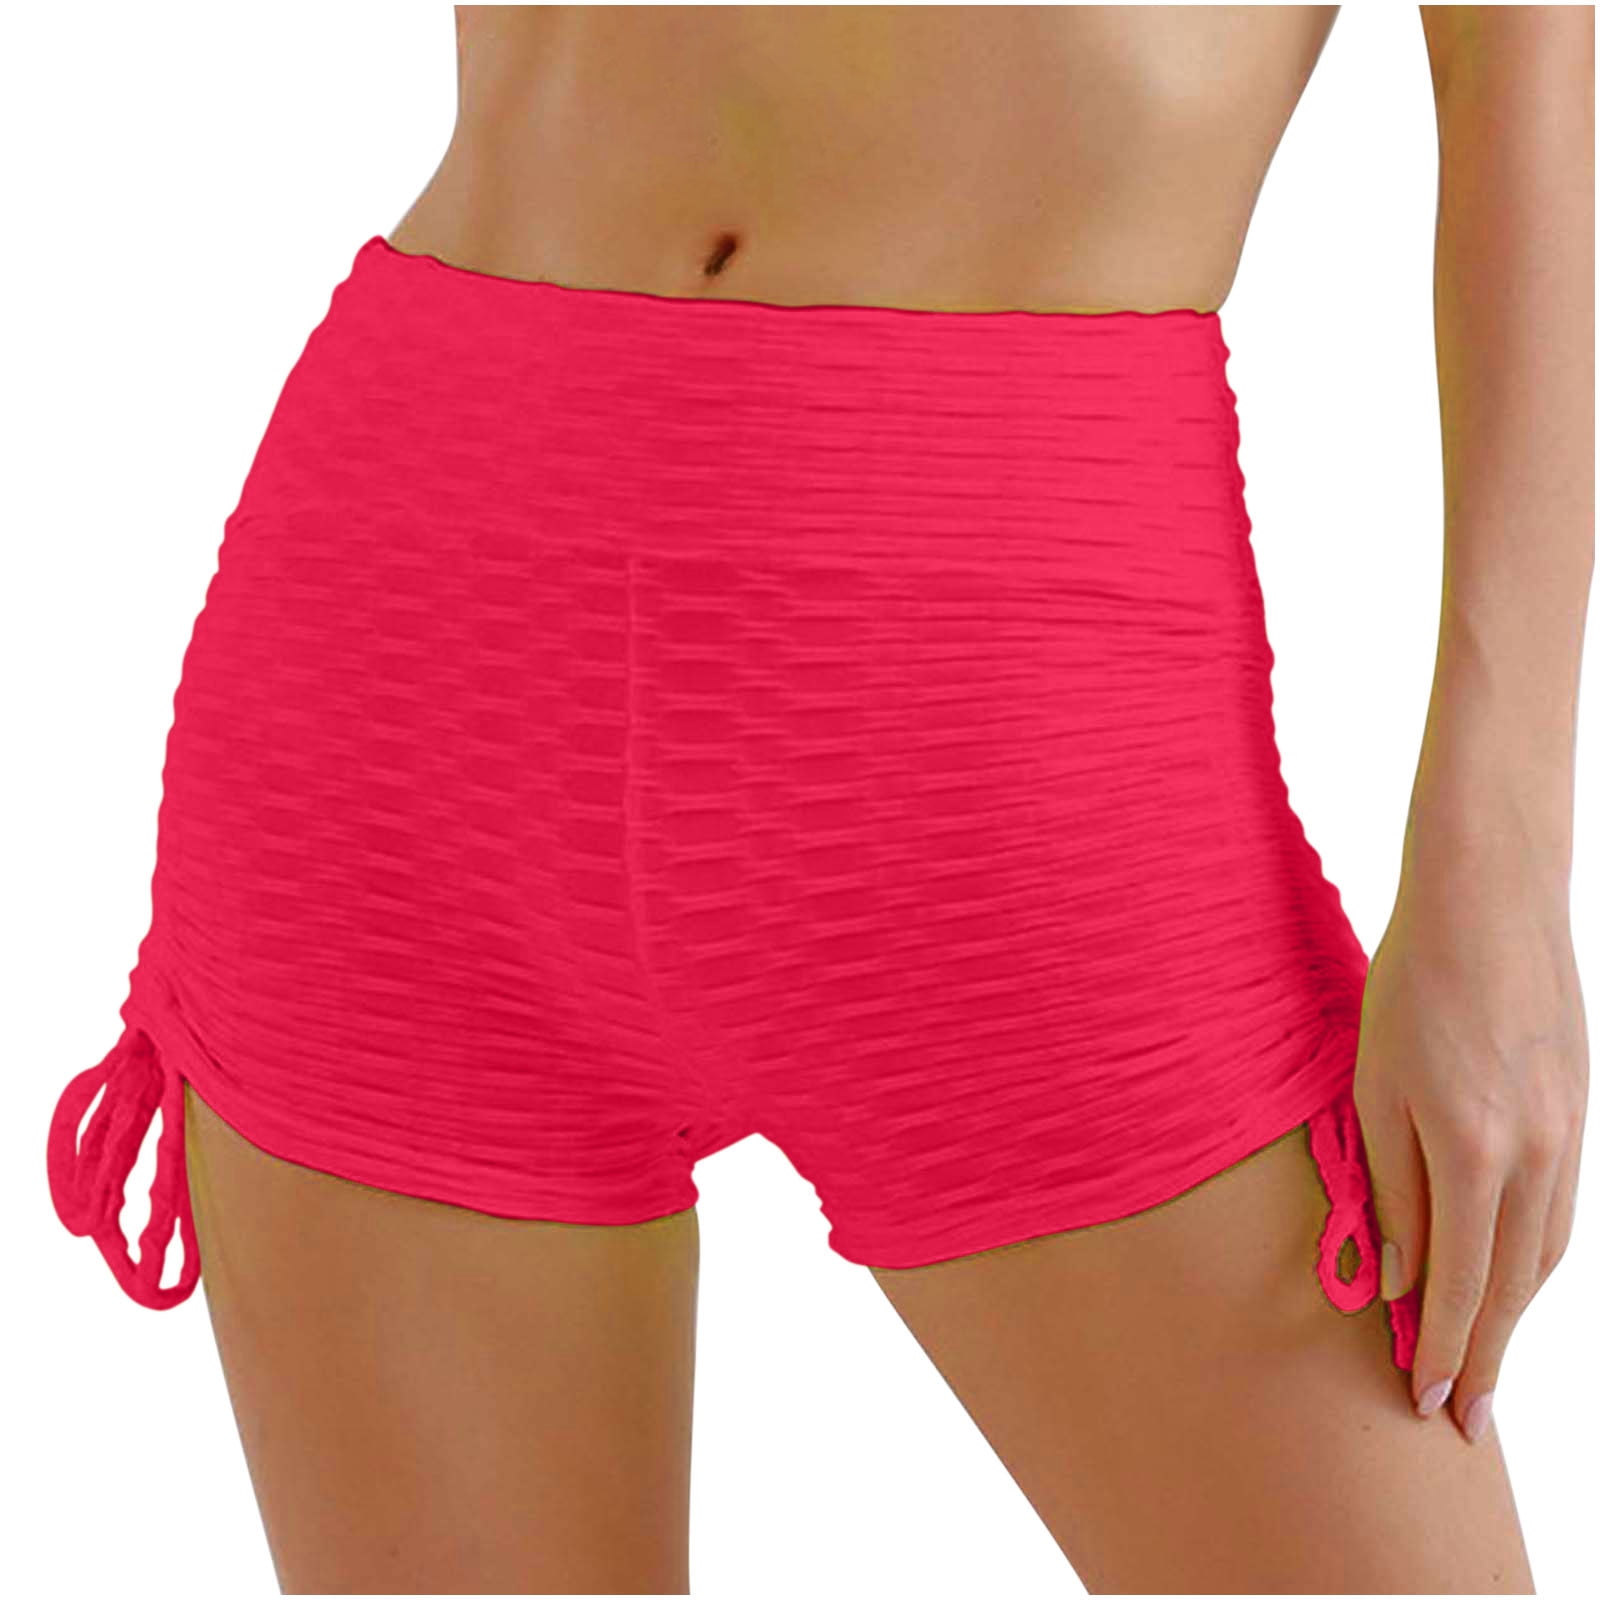 YYDGH Sports Booty Shorts for Women Side Drawstring High